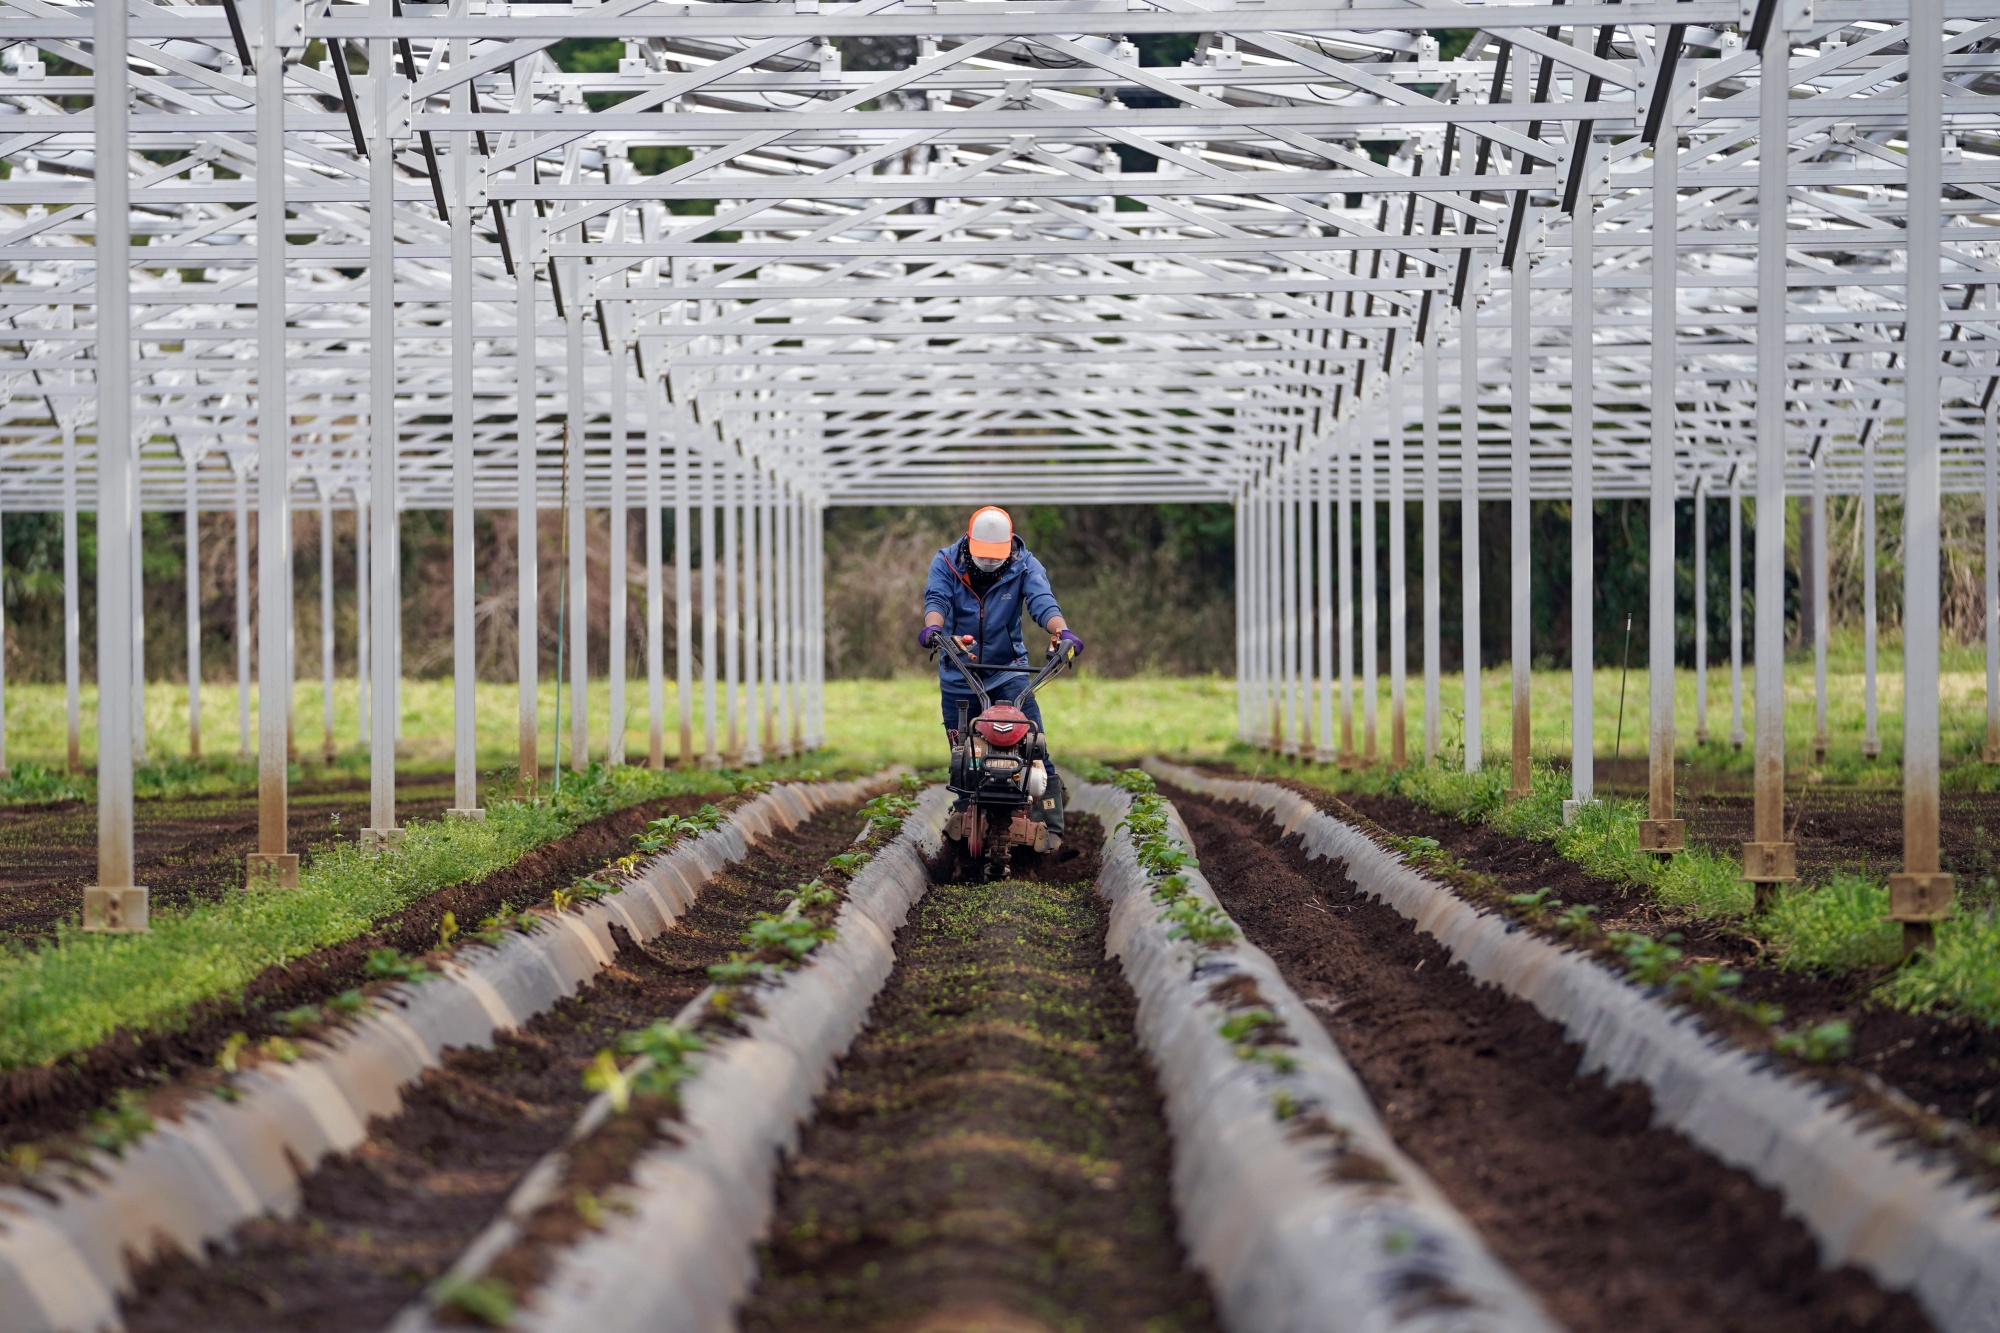 A worker cultivates a field under solar panels. Solar sharing involves the simultaneous use of farmland for producing crops and generating power.